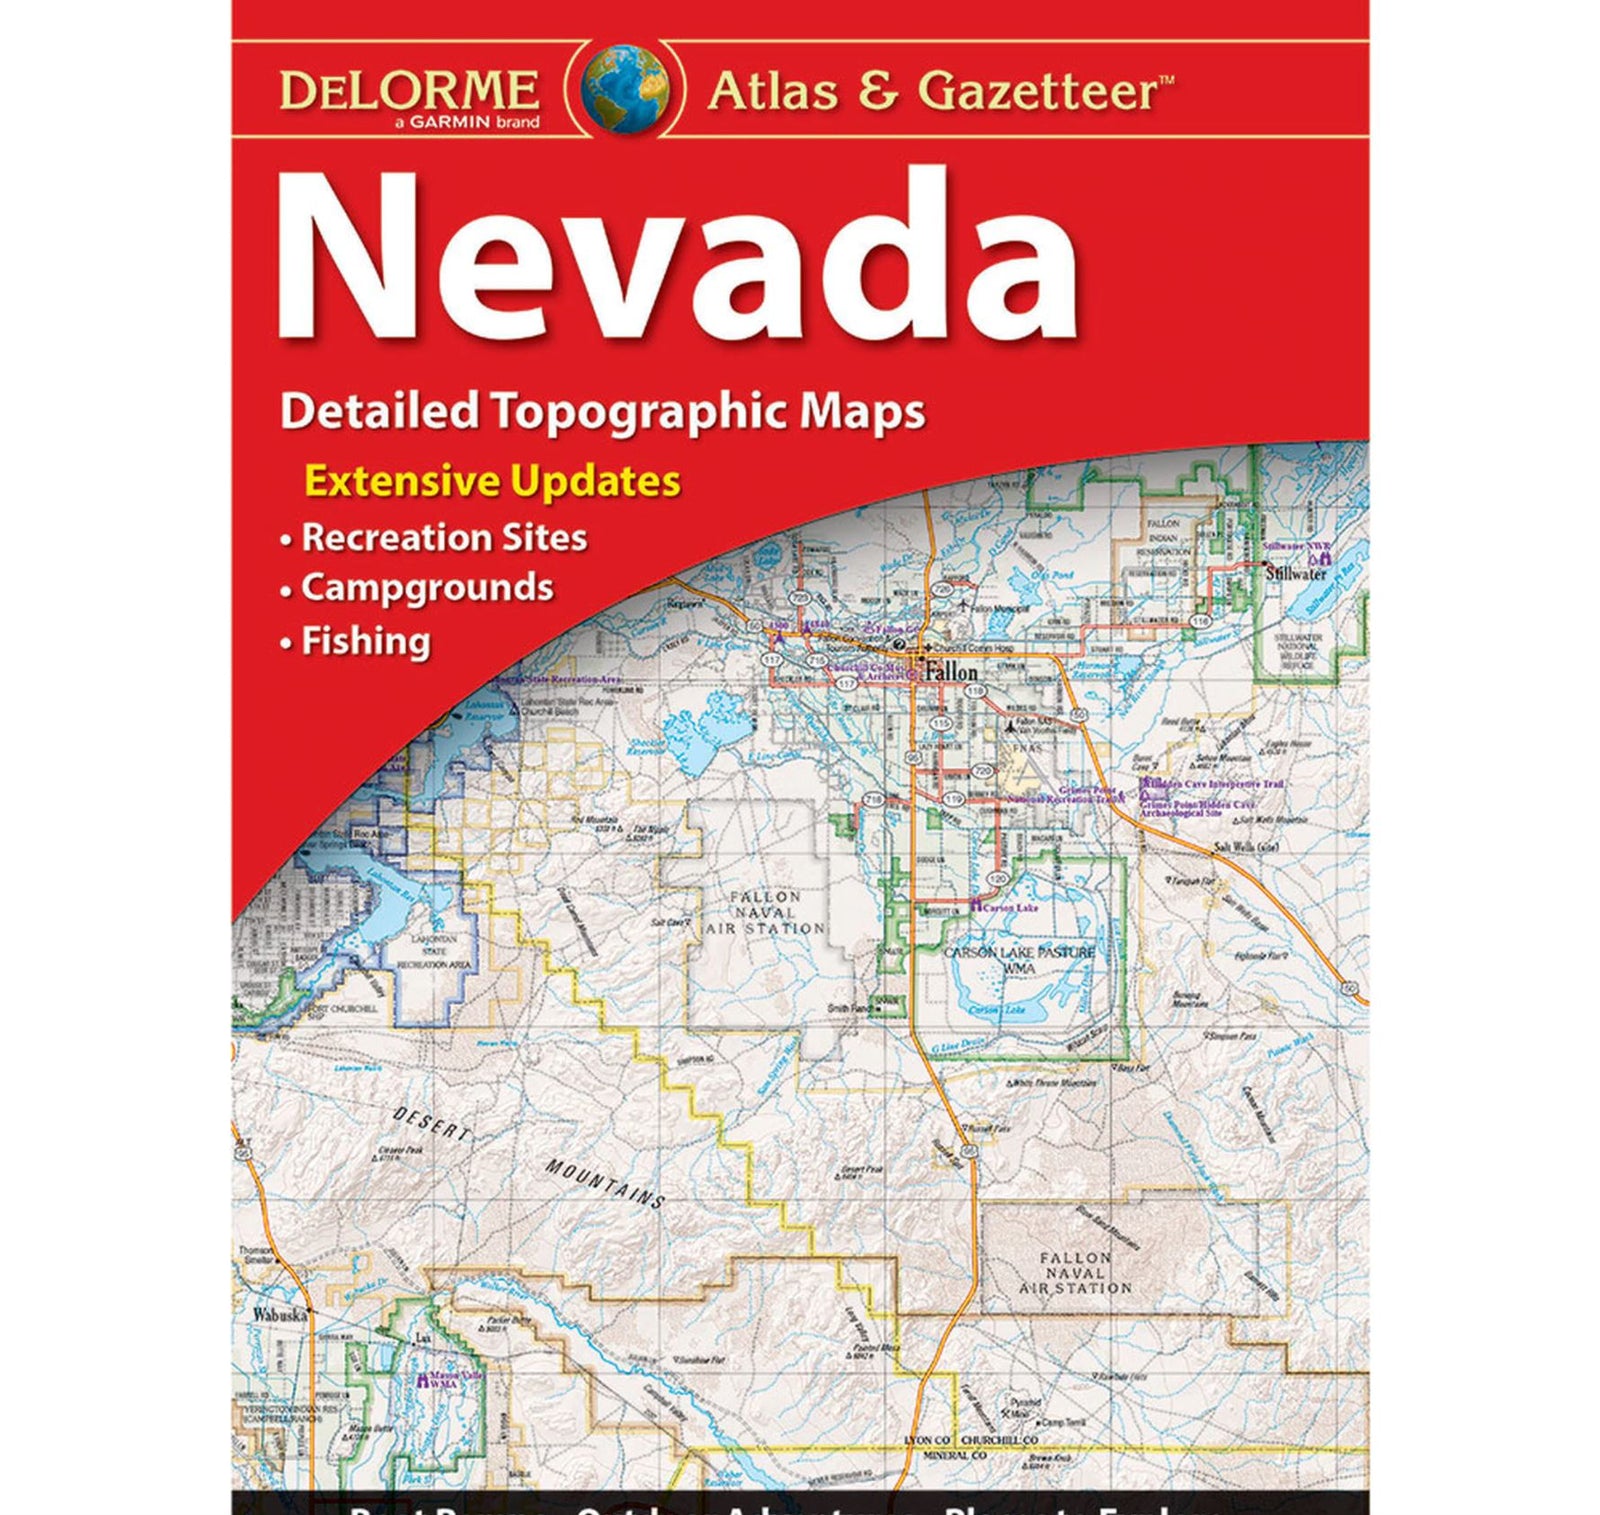 The cover of the nevada delorme atlas